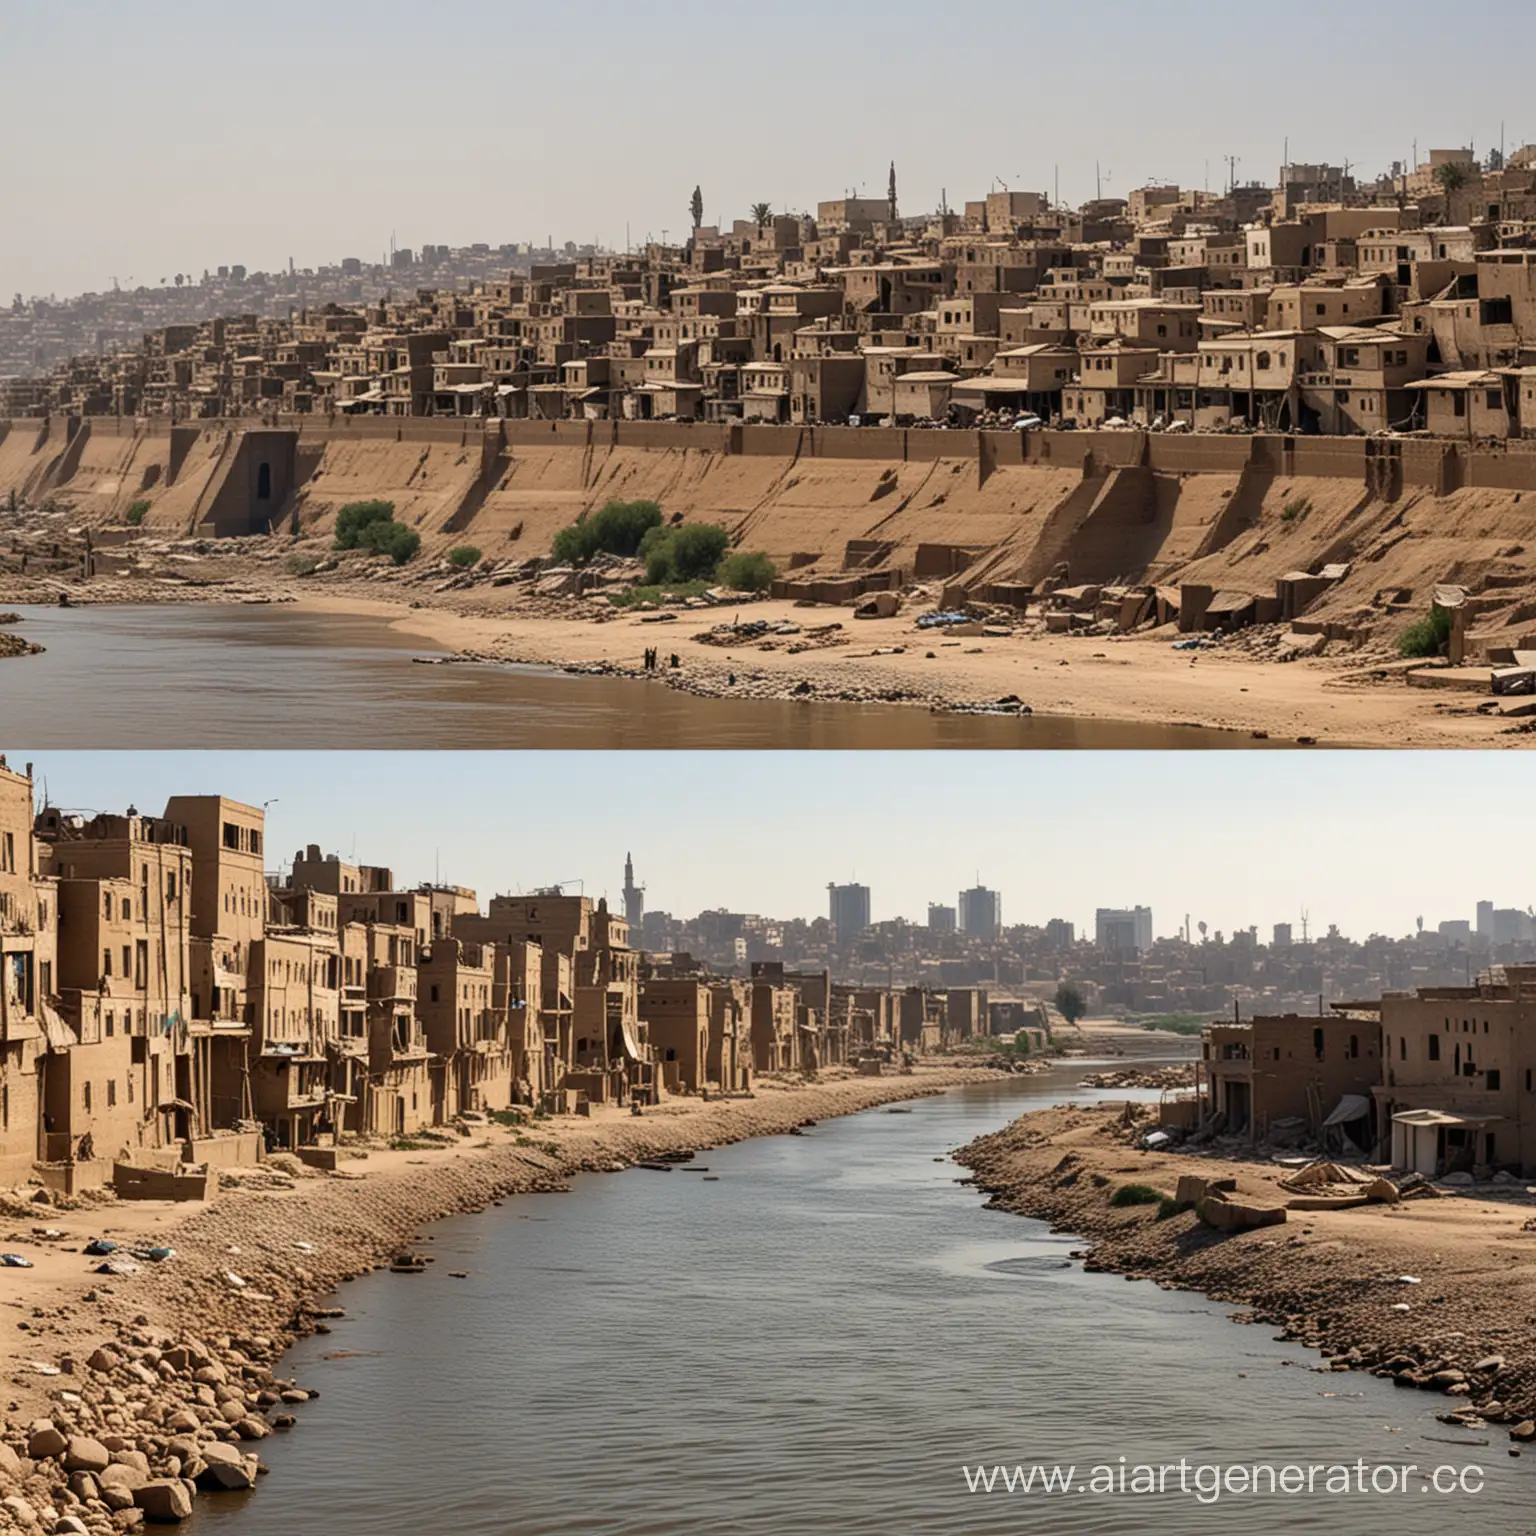 Riverbank-Contrast-Ruins-and-Slums-vs-Luxurious-Dwellings